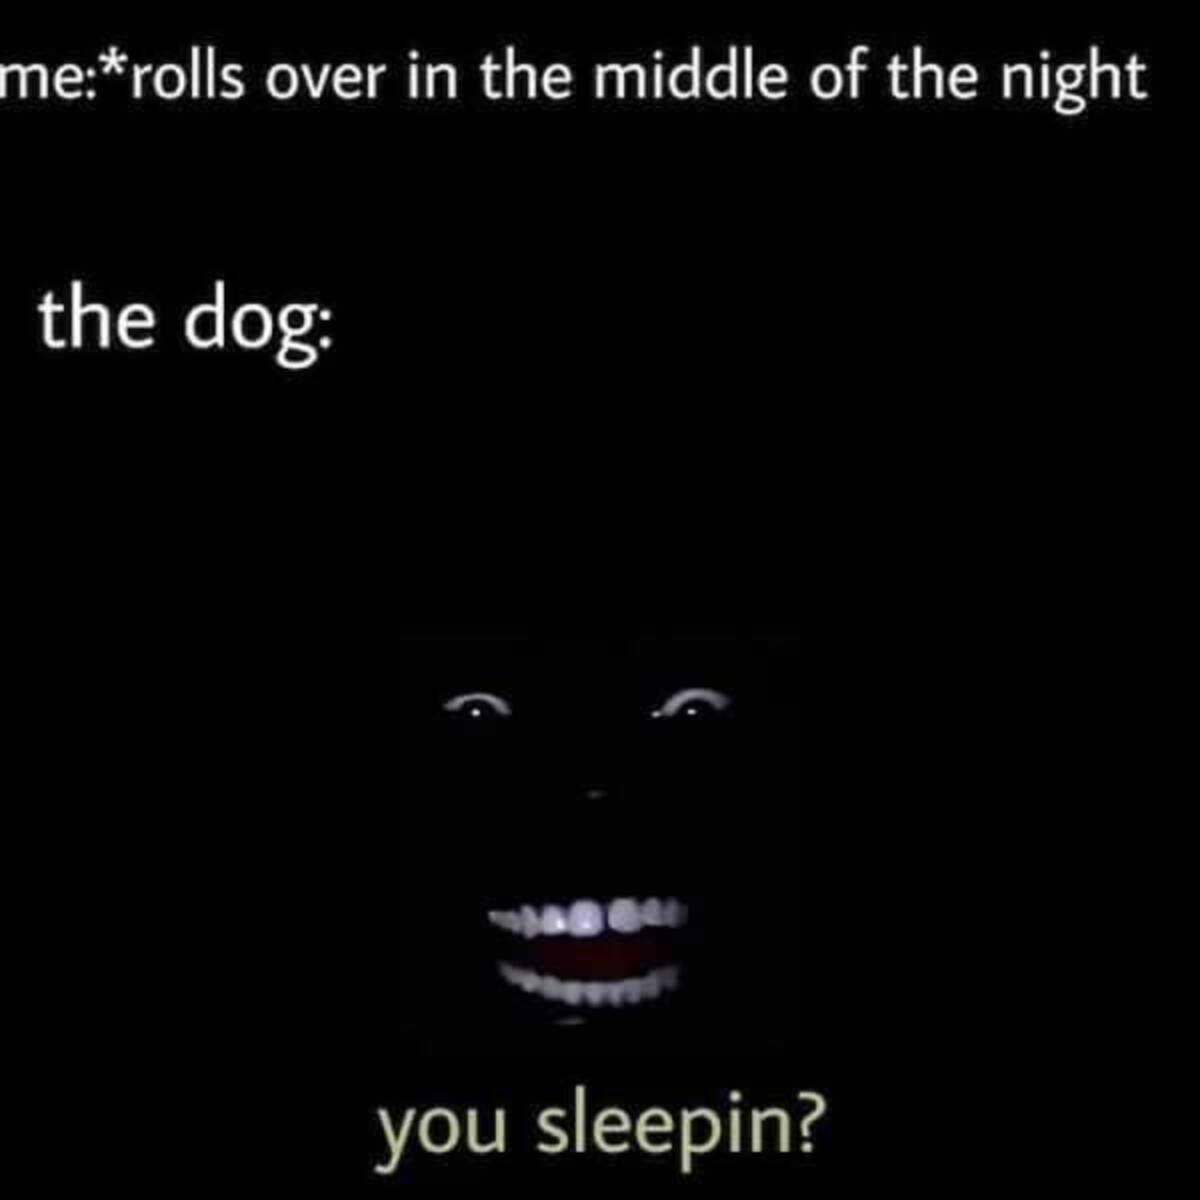 head - merolls over in the middle of the night the dog you sleepin?